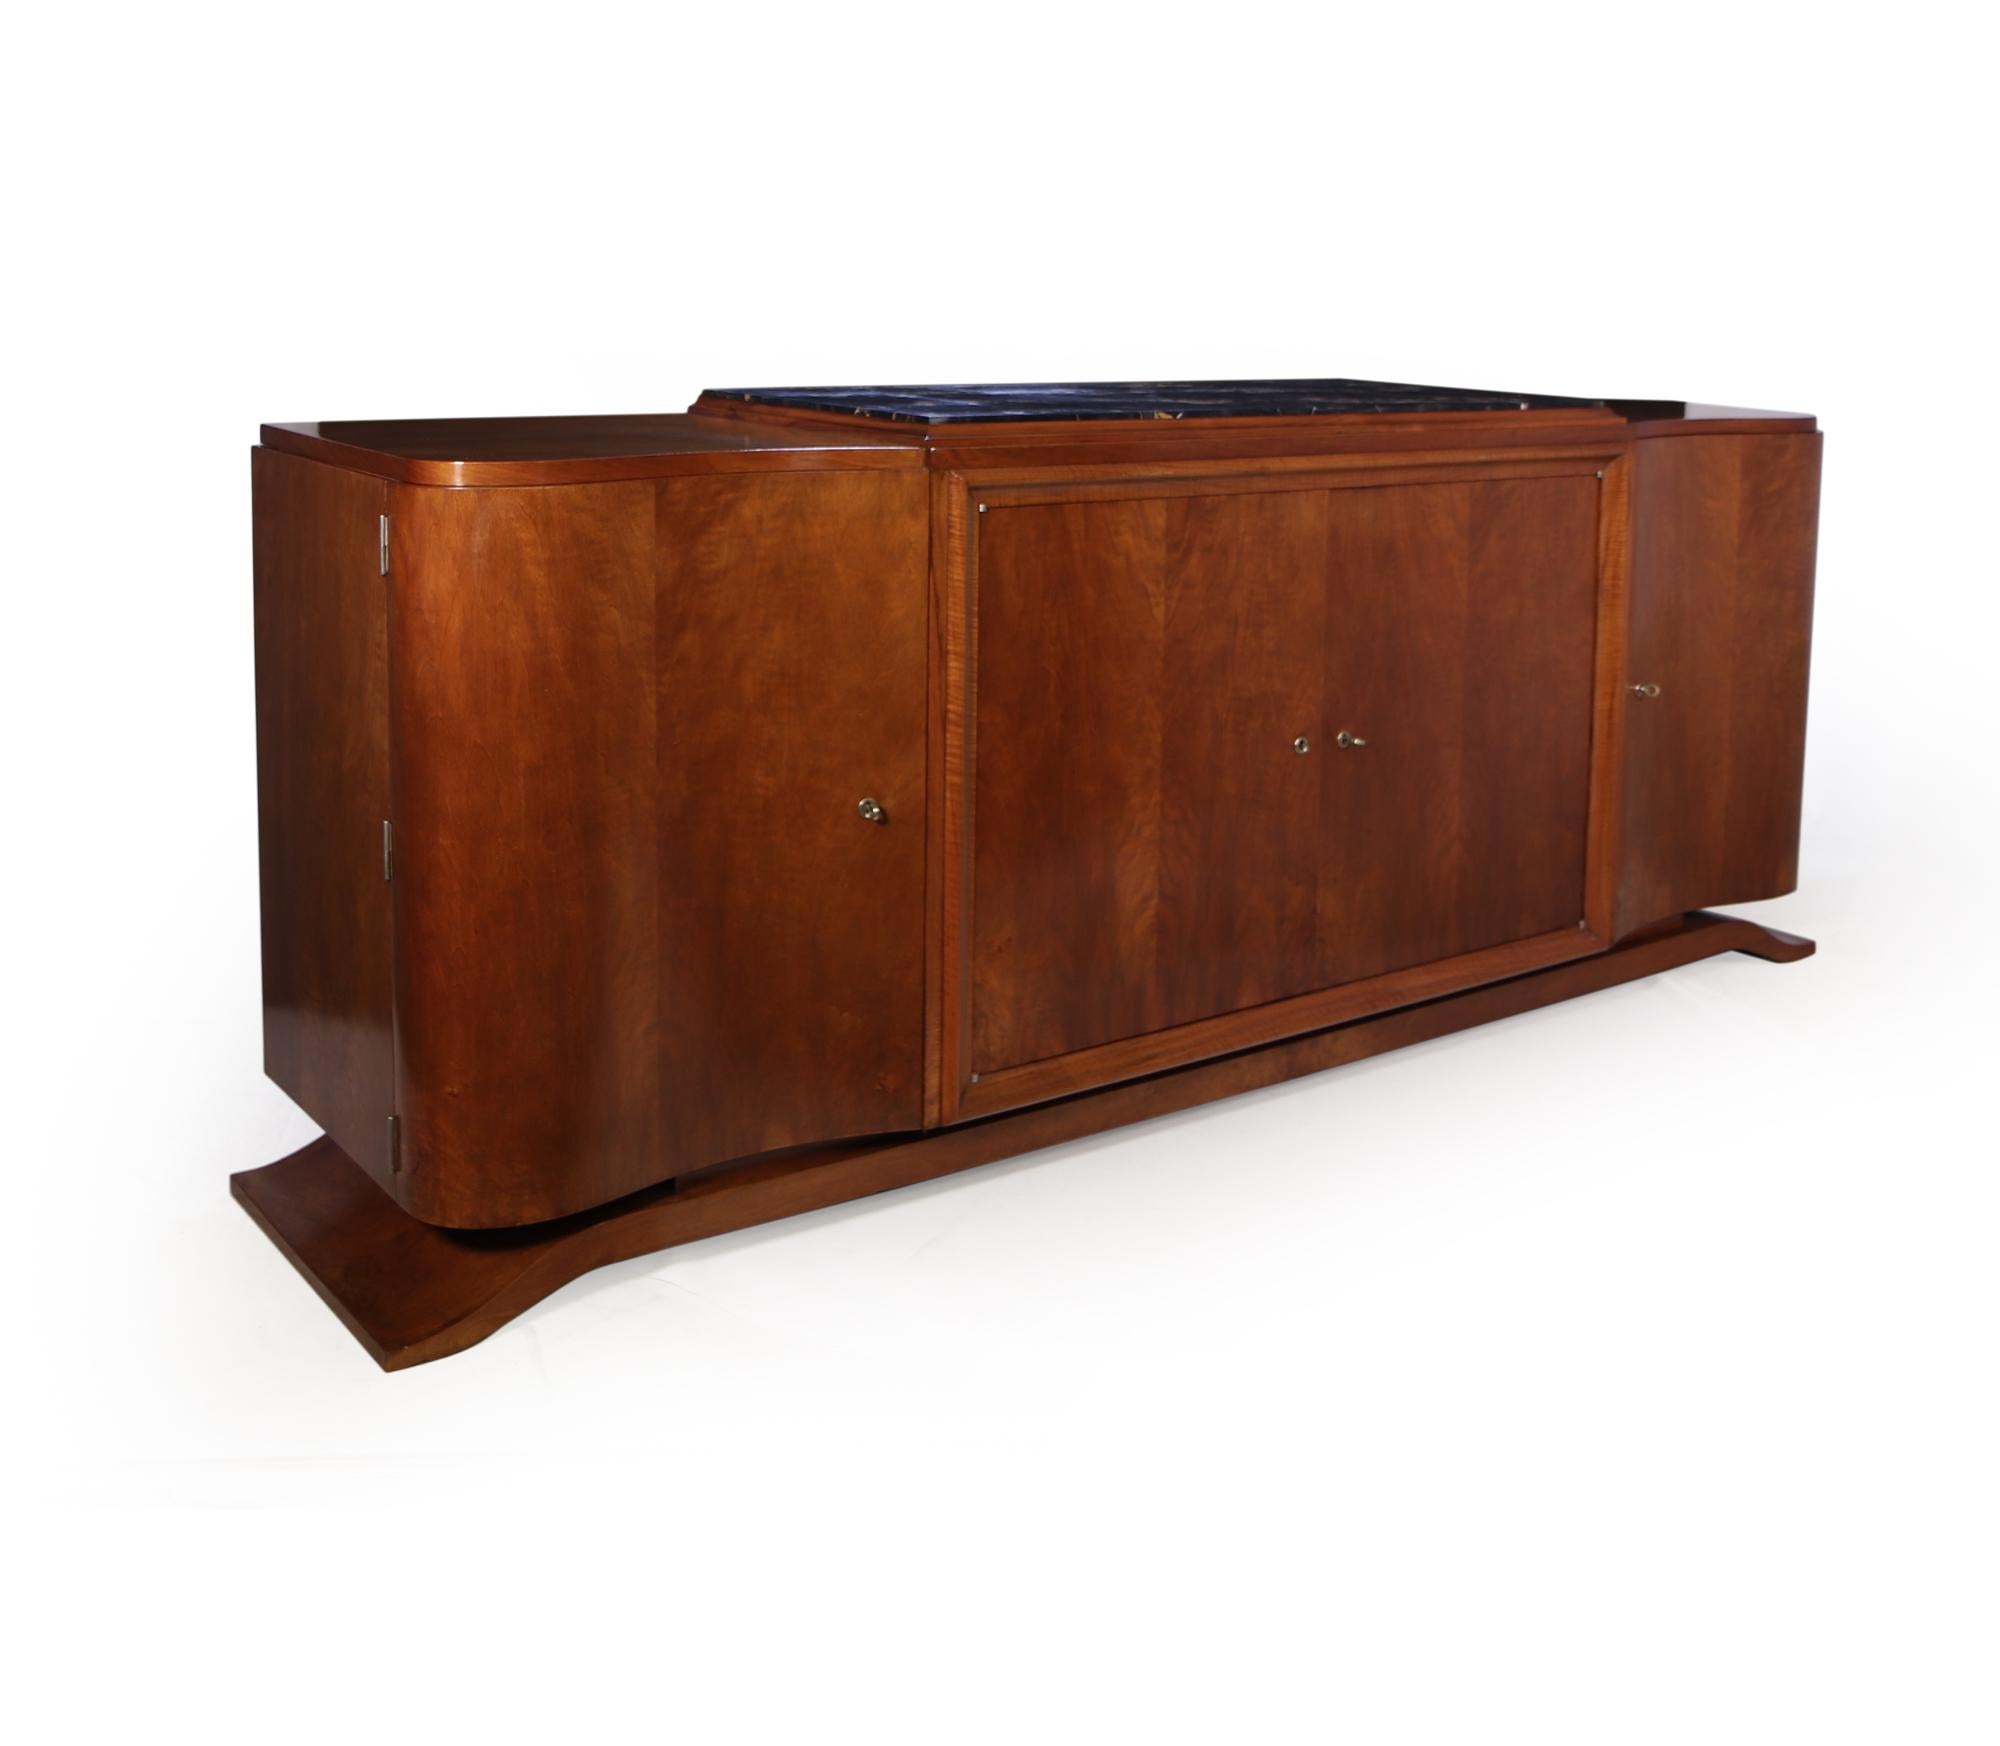 Art Deco Very Large Four Door Sideboard by Maison Gouffe from Paris in the 1930’s